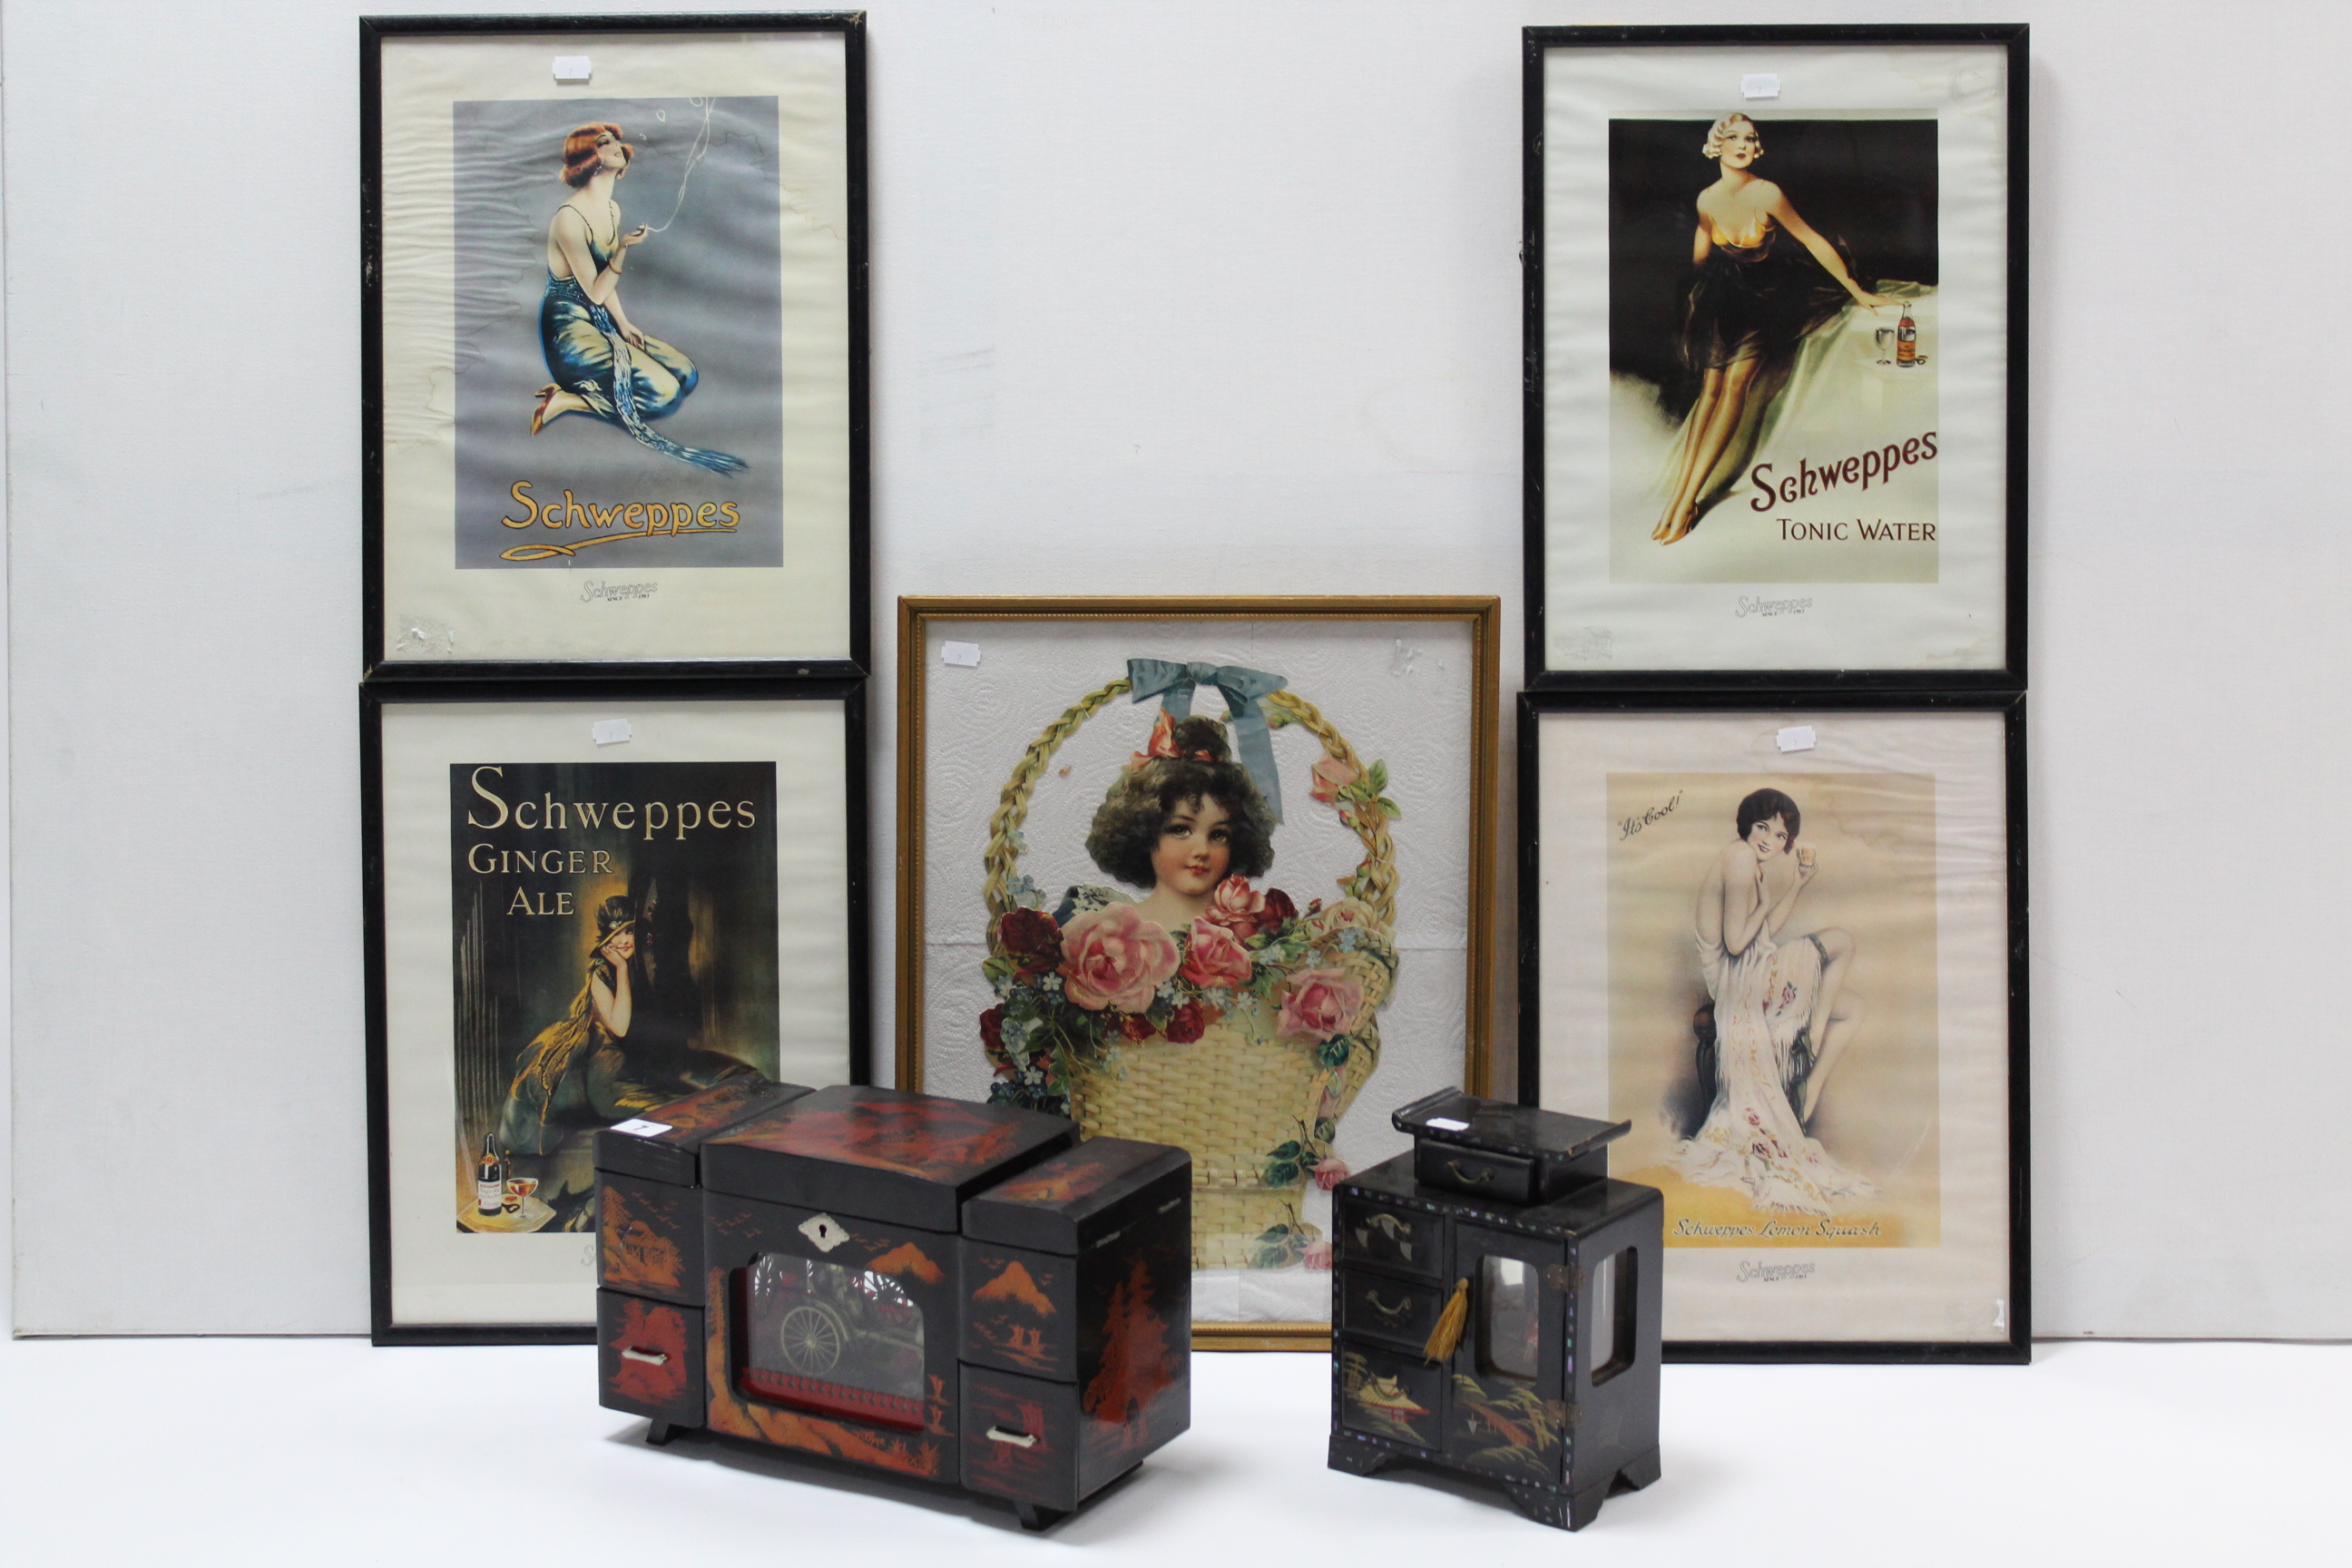 Two black lacquered jewellery cabinets; five reproduction “Schweppes” coloured prints; & a scrap